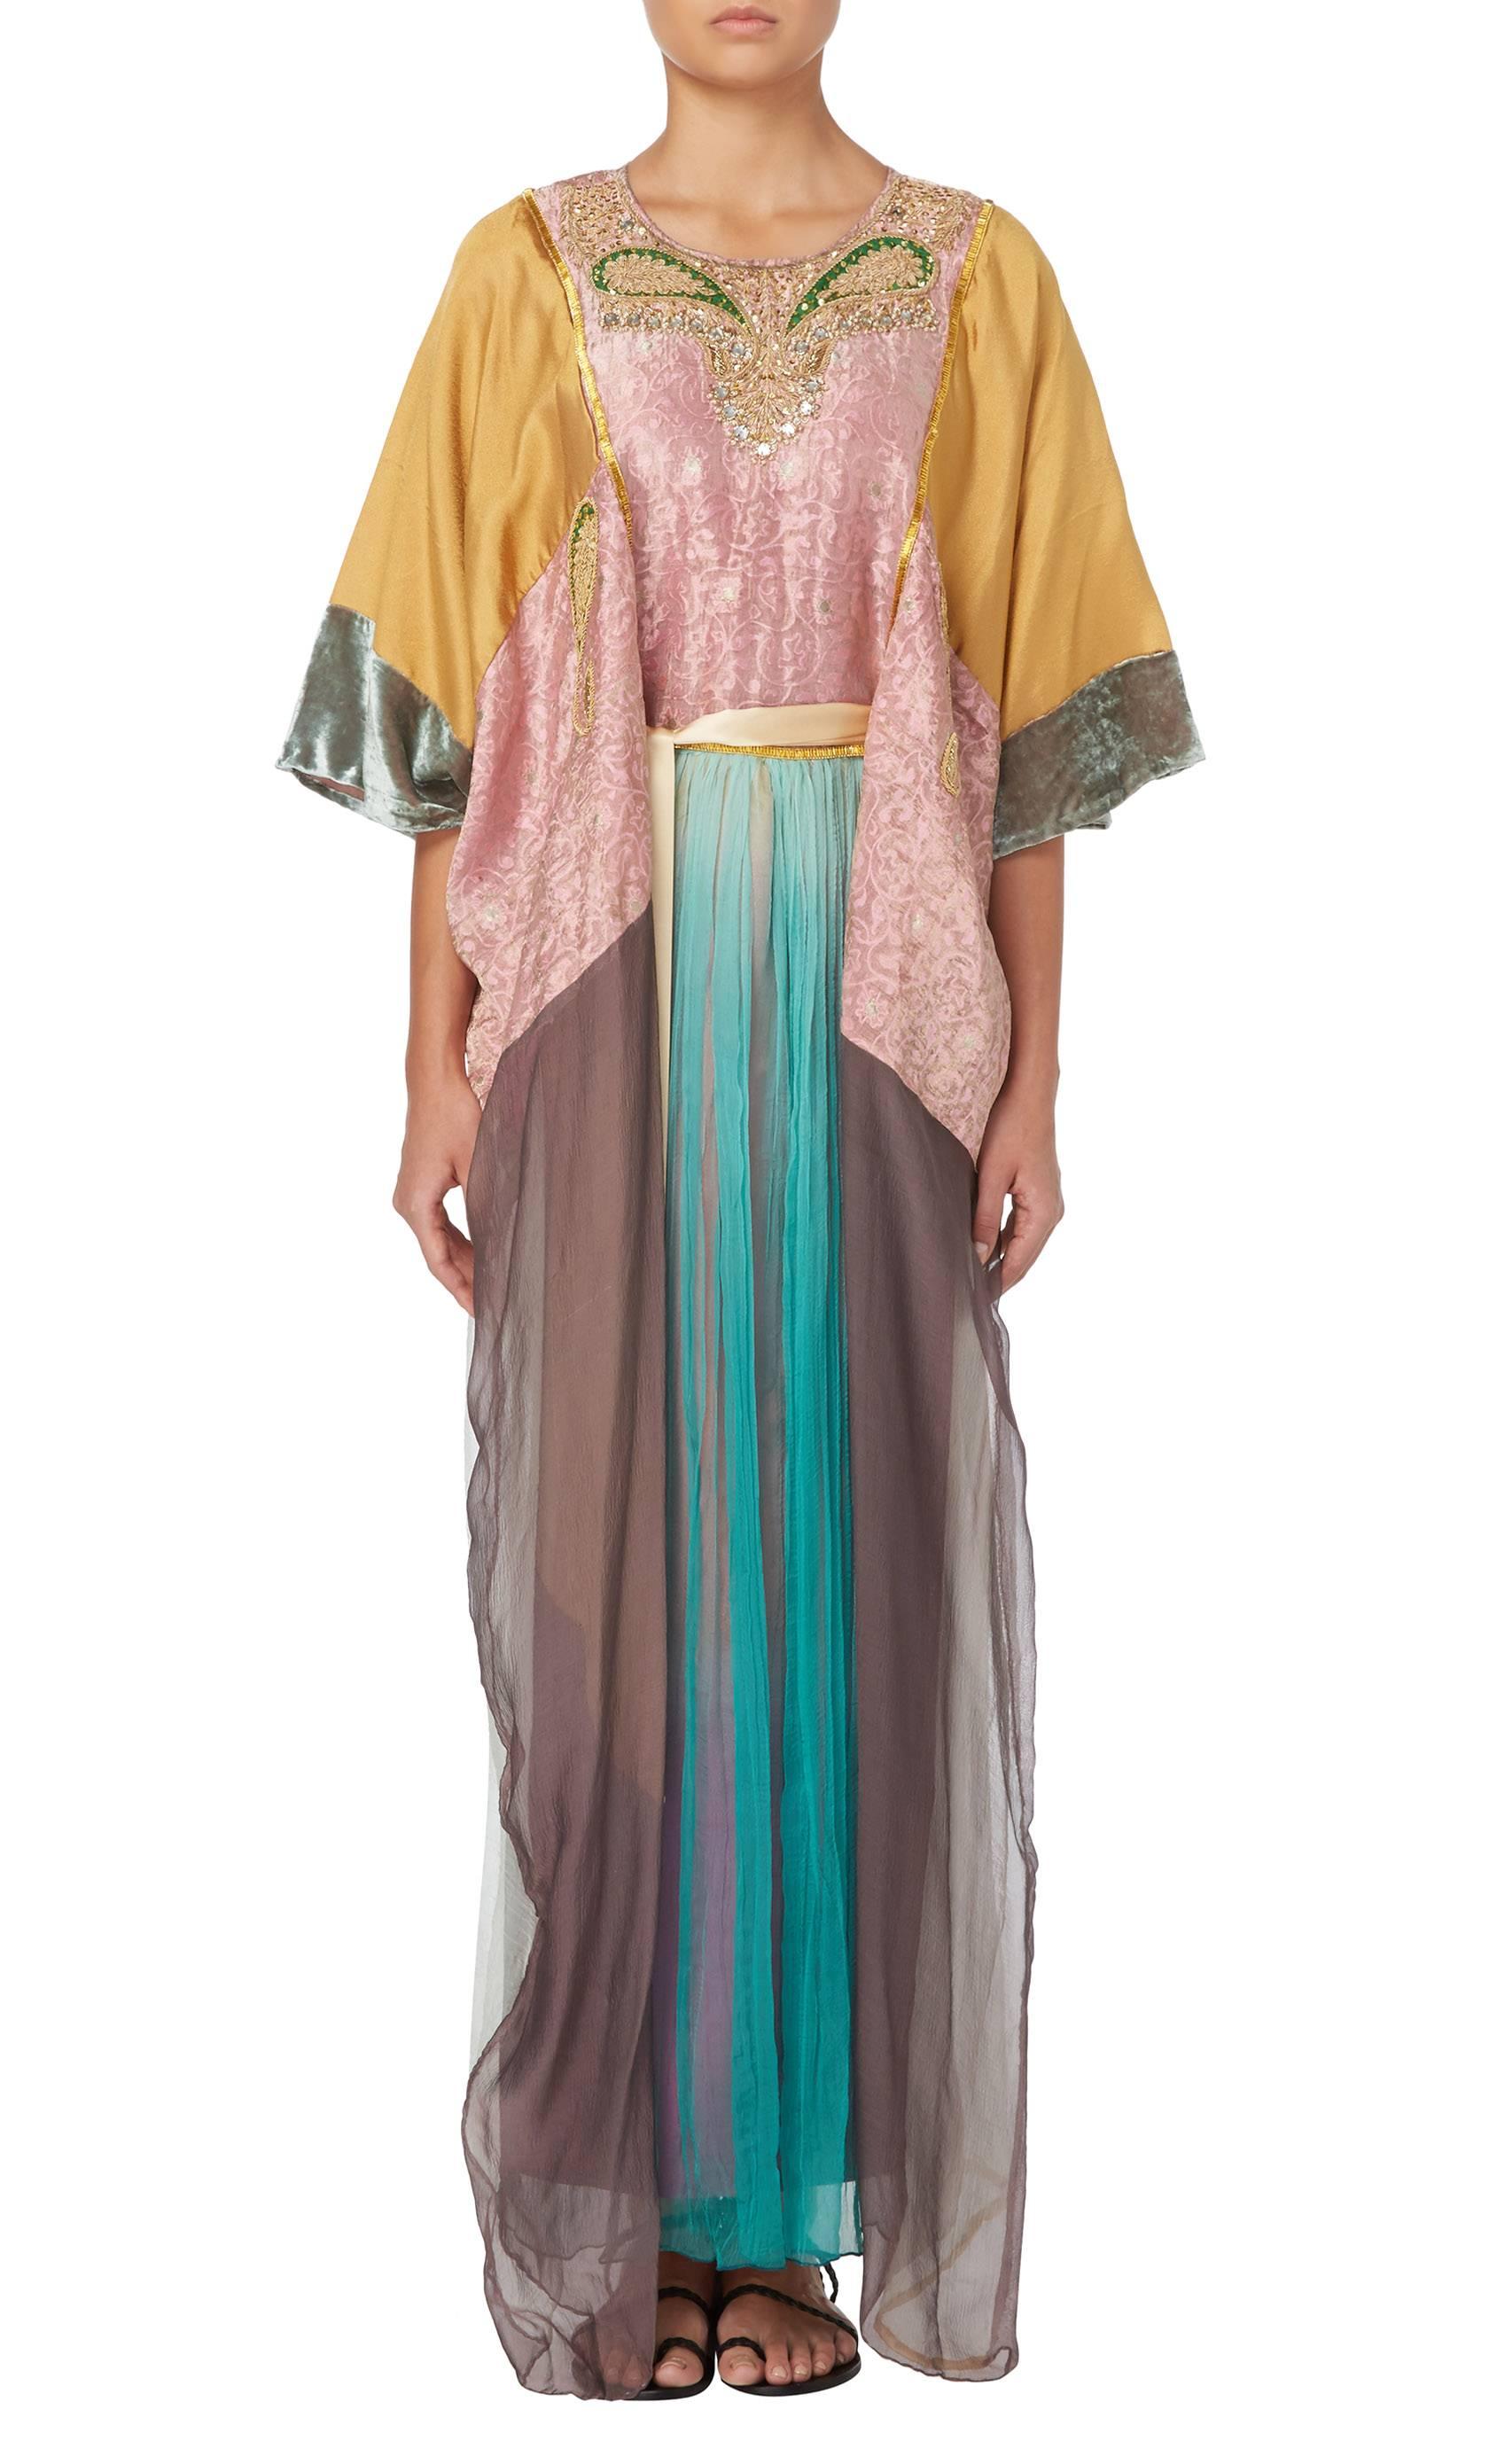 An amazing alternative to a traditional evening gown, this Thea Porter couture kaftan is the height of bohemian luxury. Constructed in a patchwork of silk brocade, velvet and chiffon, the kaftan is embellished at the neckline with gold beads,